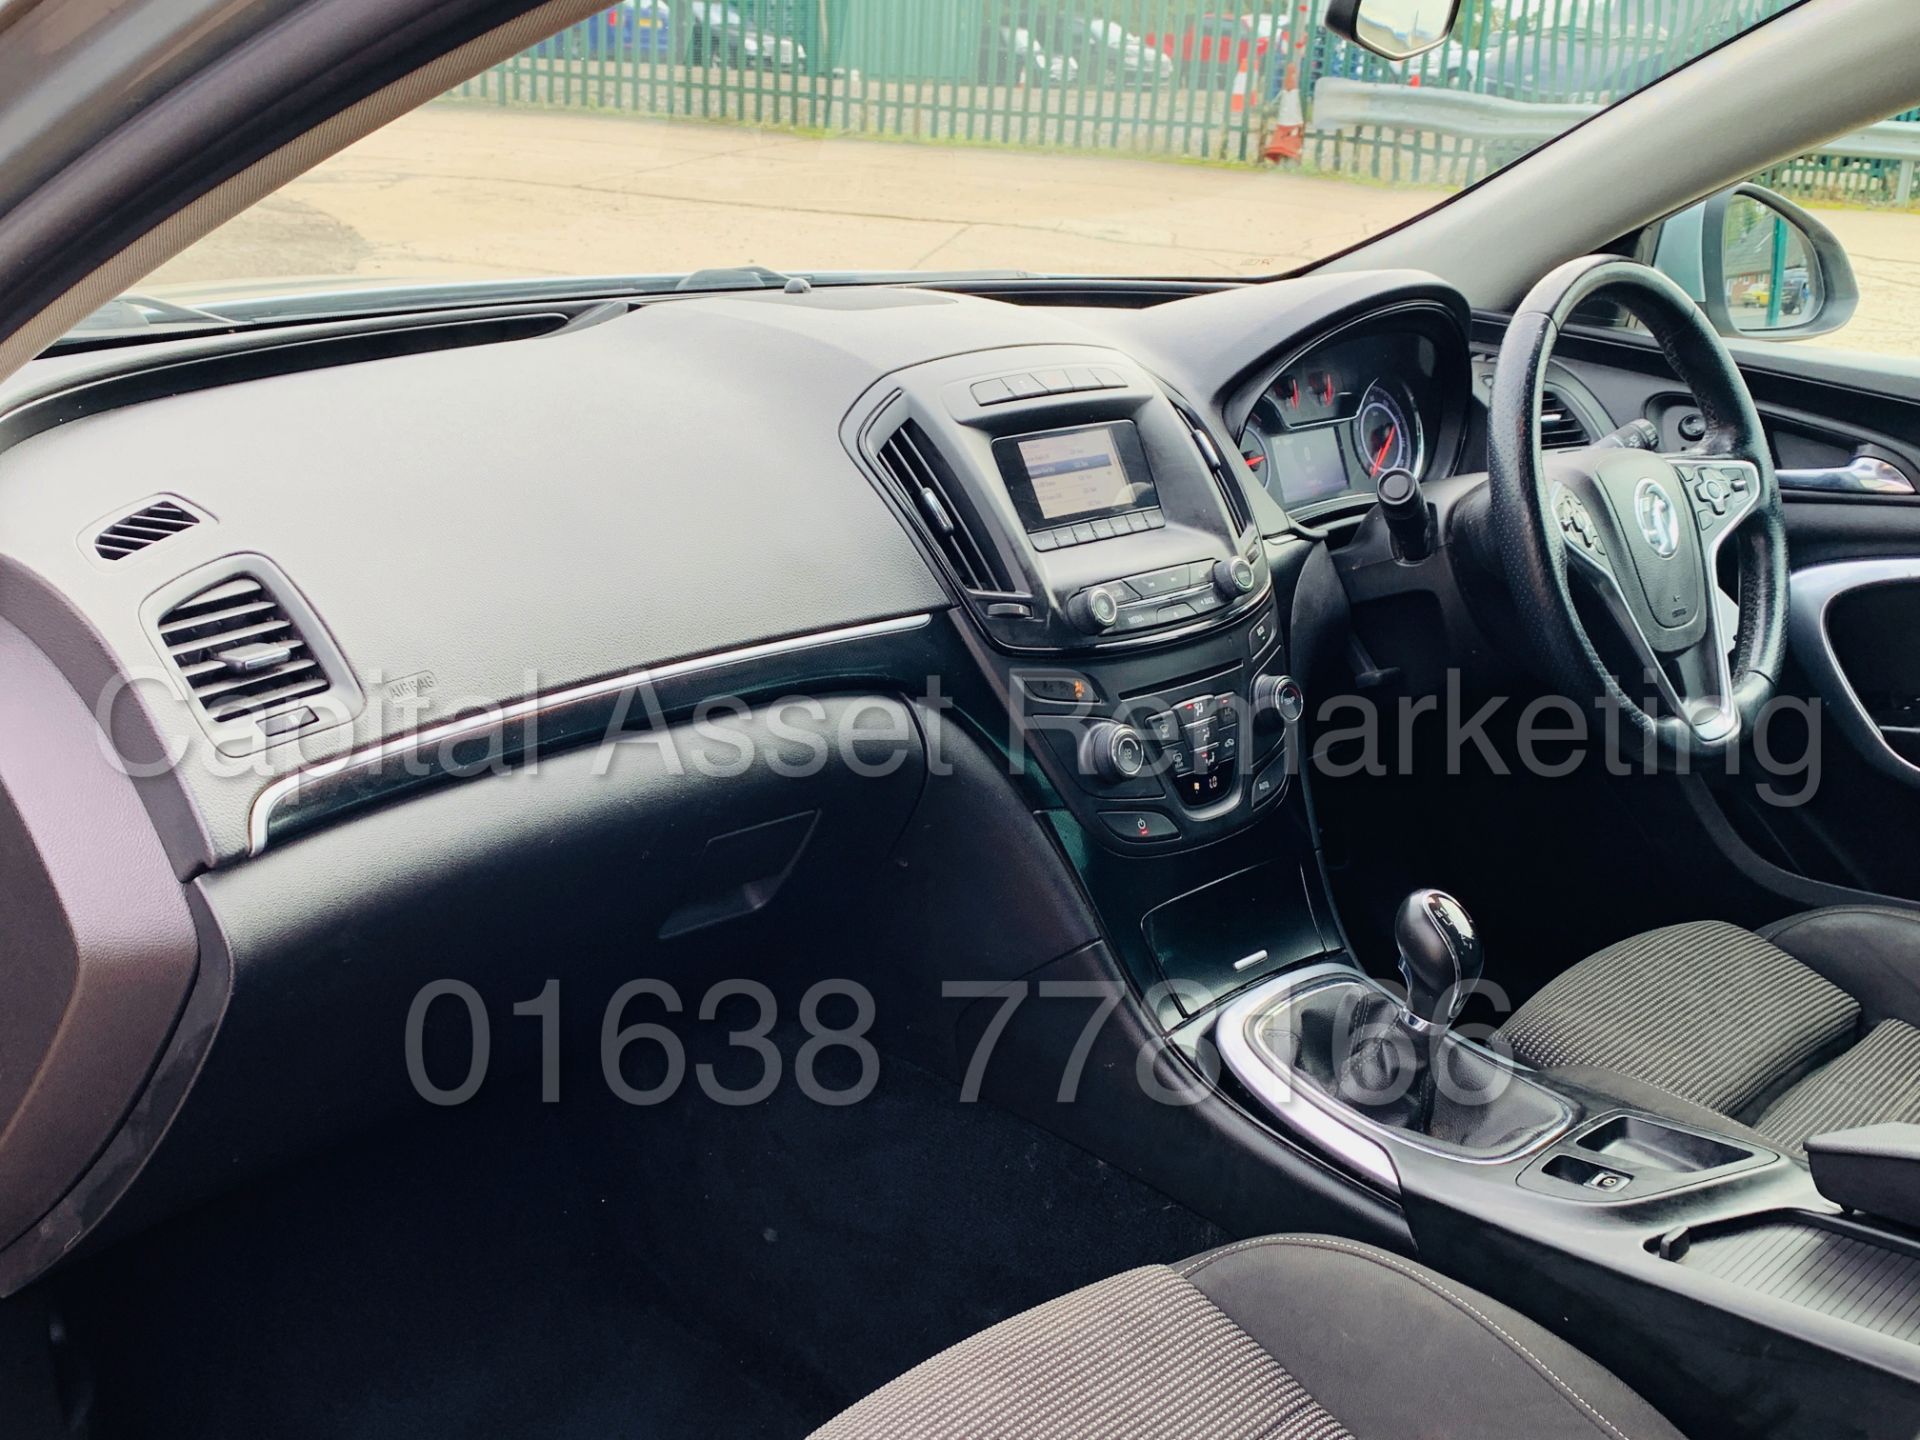 (On Sale) VAUXHALL INSIGNIA *SRI EDITION* (2015) '2.0 CDTI - STOP/START - 6 SPEED' (1 OWNER) - Image 21 of 40